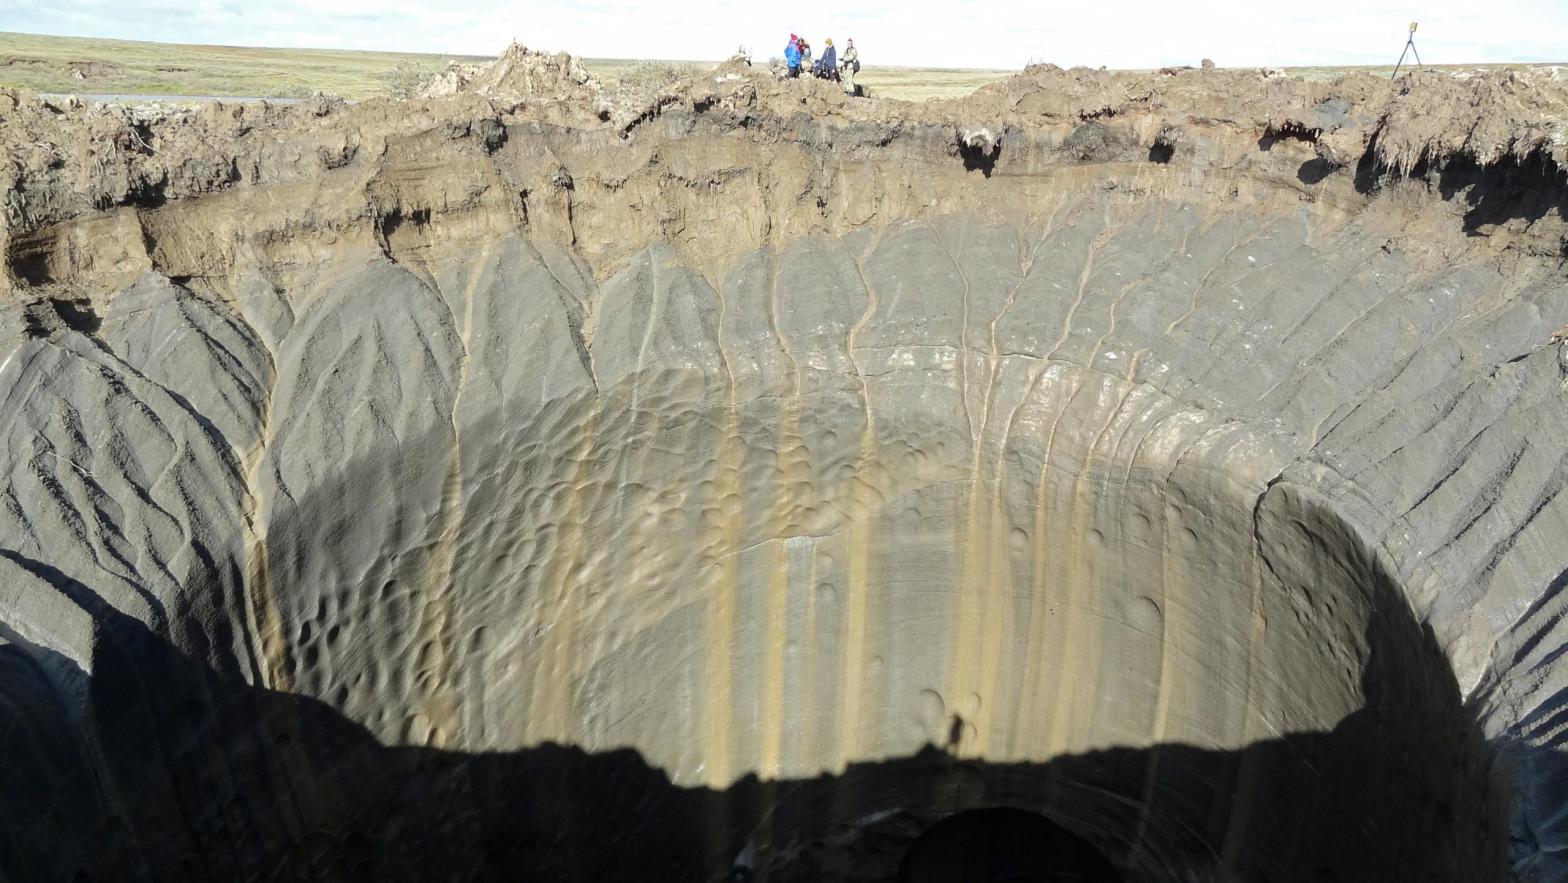 A photo taken on August 25, 2014 shows a crater on the Yamal Peninsula, northern Siberia. (Photo: Vasily Bogoyavlensky, Getty Images)